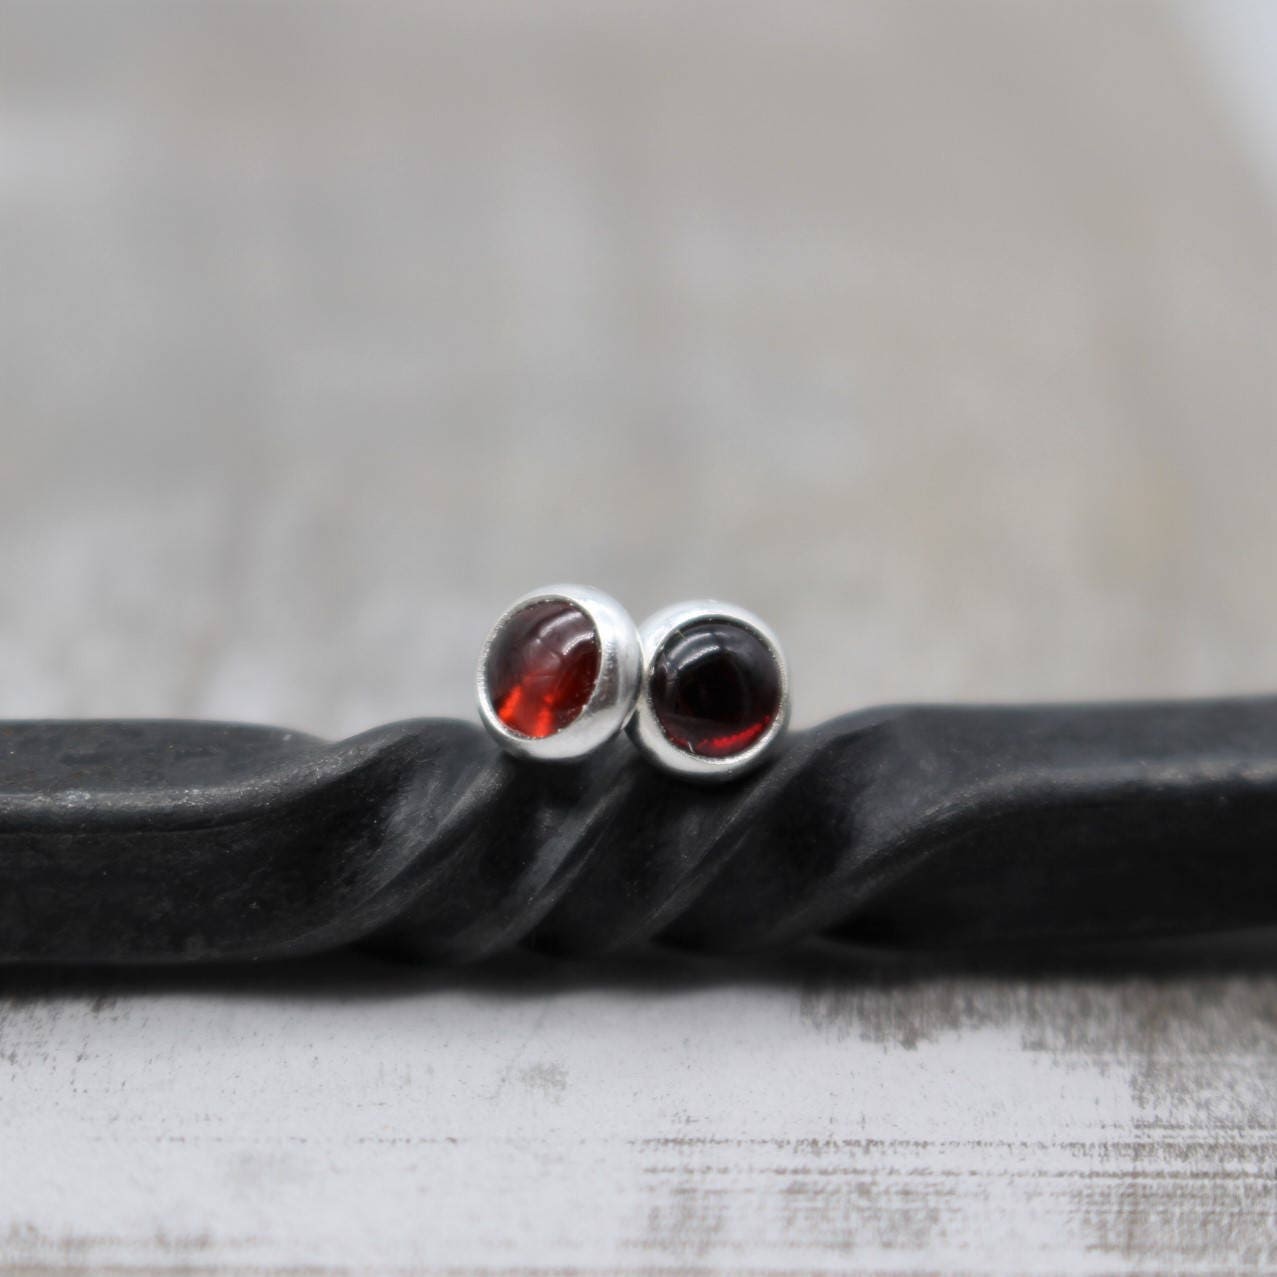 Small Garnet 5mm sterling silver stud earrings - January birthstone Jewelry - gift for her - jewelry sale